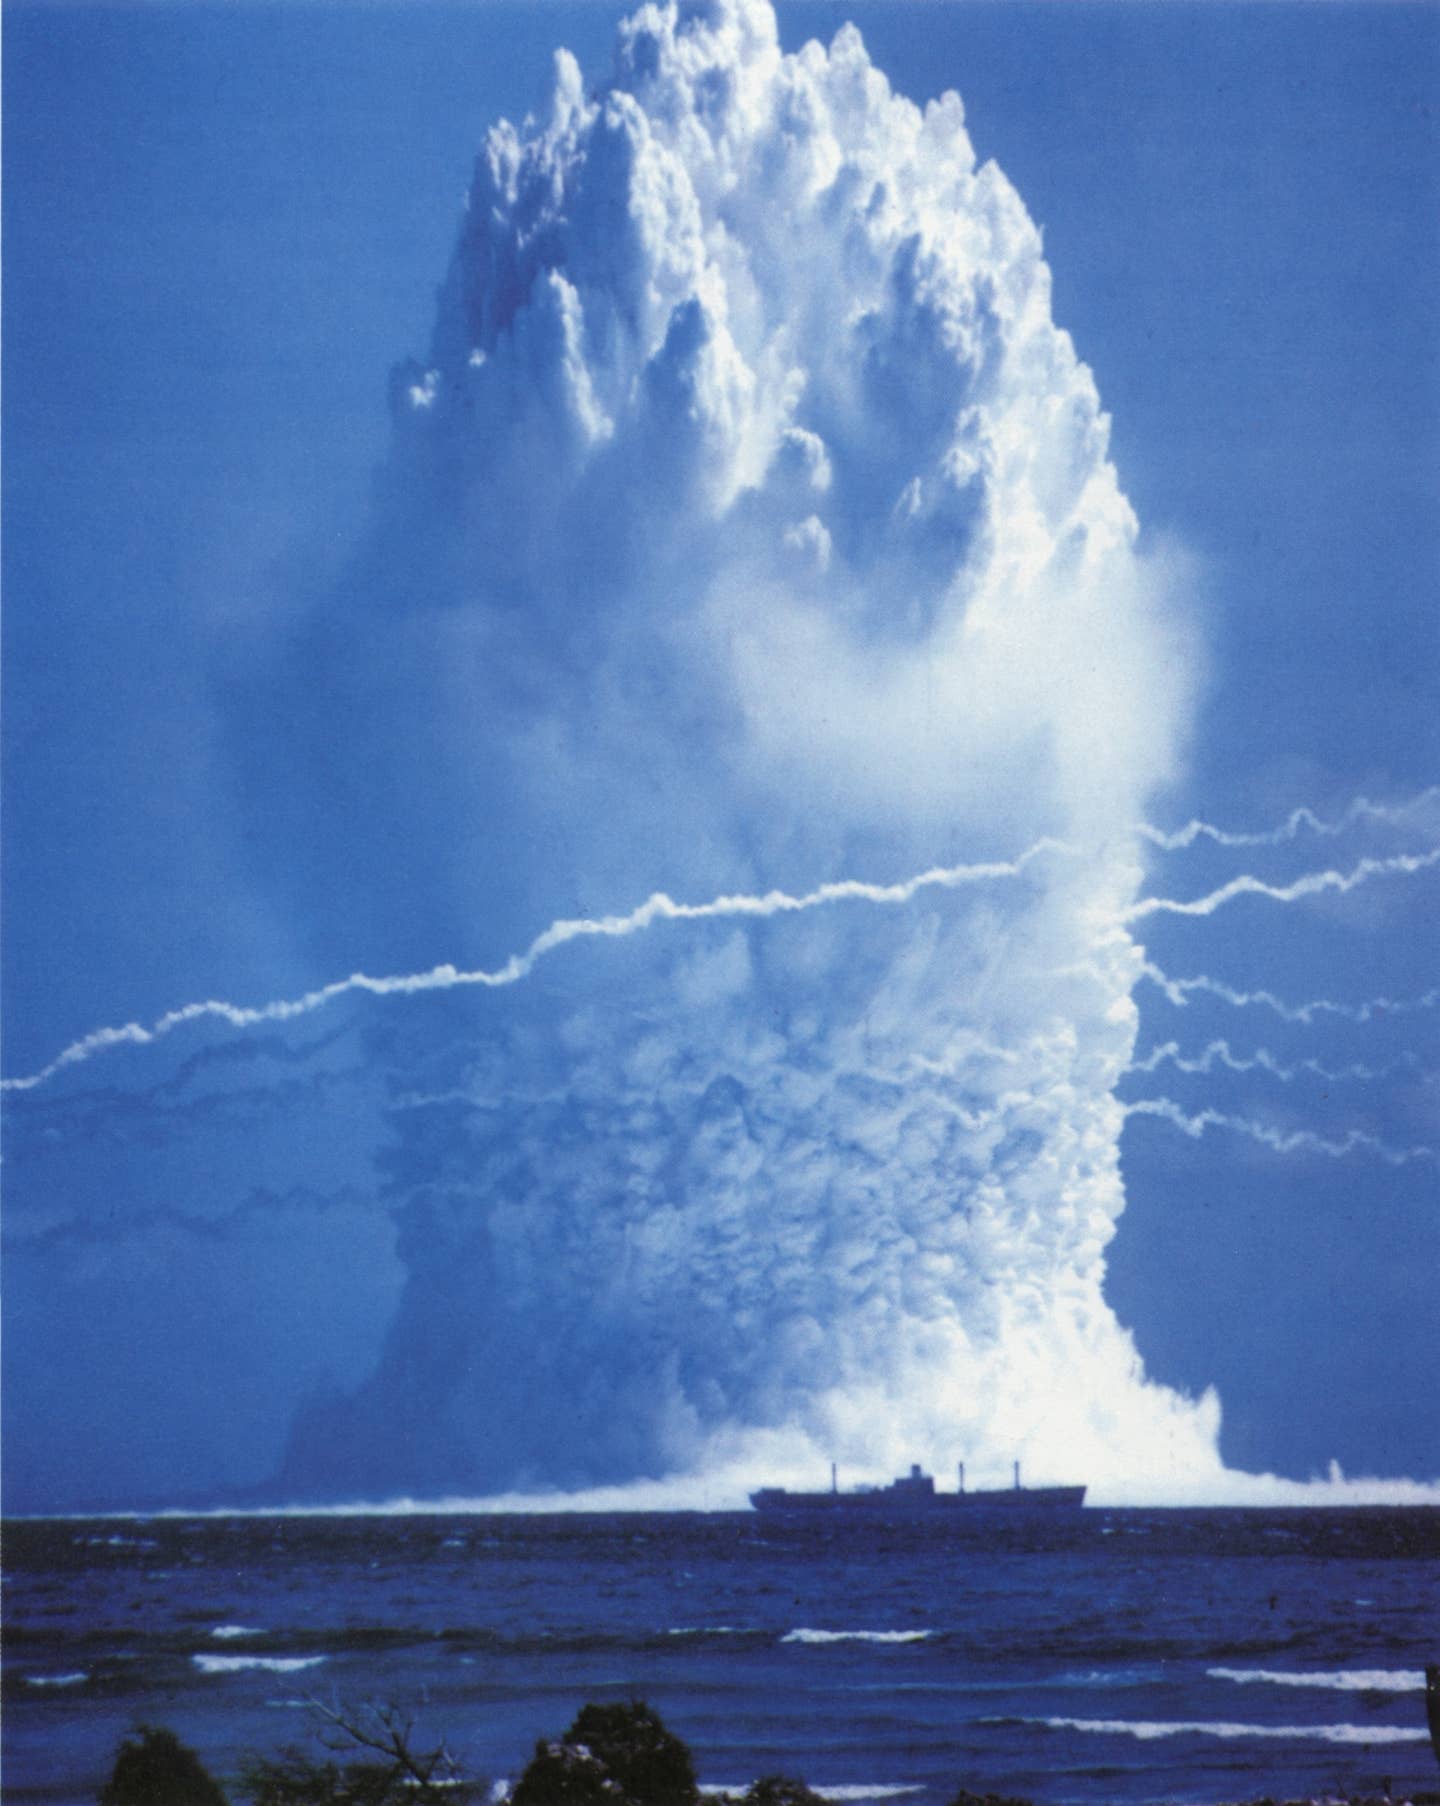 The underwater nuclear test Hardtack Umbrella was an 8-kiloton explosion. Most nuclear torpedoes were 10-kilotons or greater.<br>(U.S. Navy)